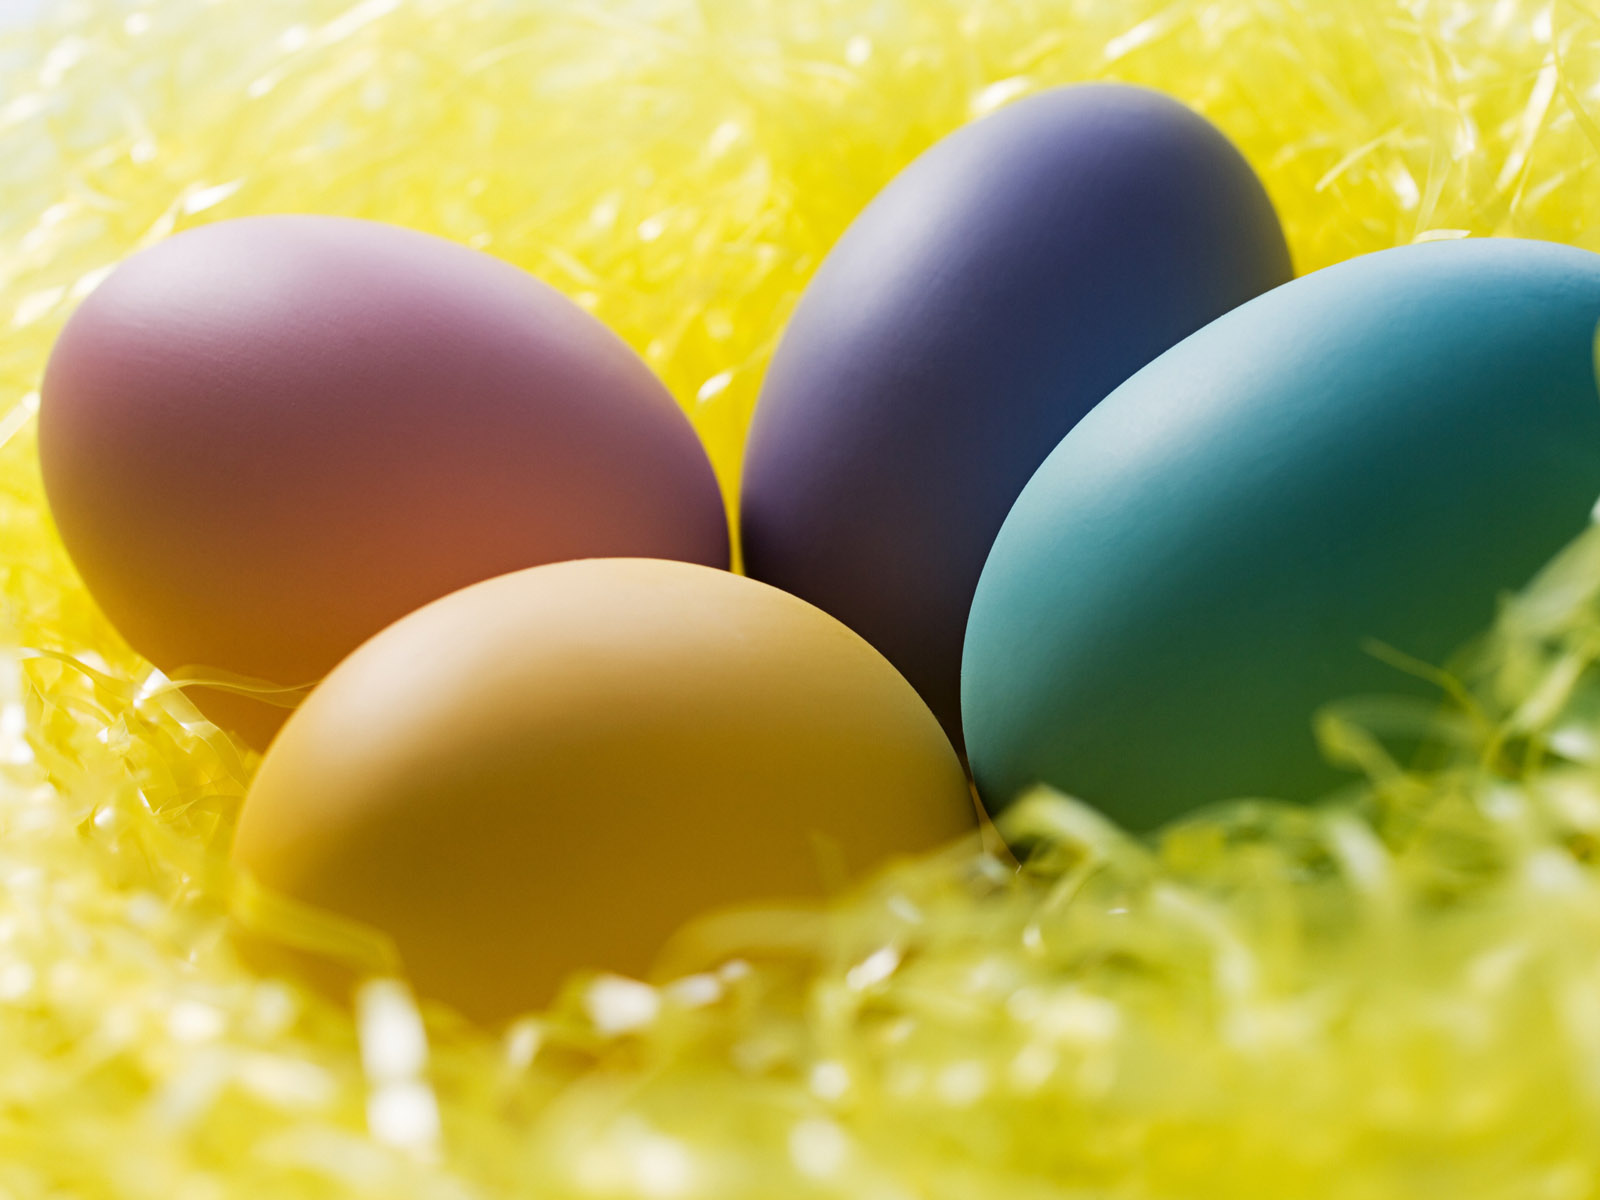  chicks and easter eggs wallpapers for your desktop backgrounds